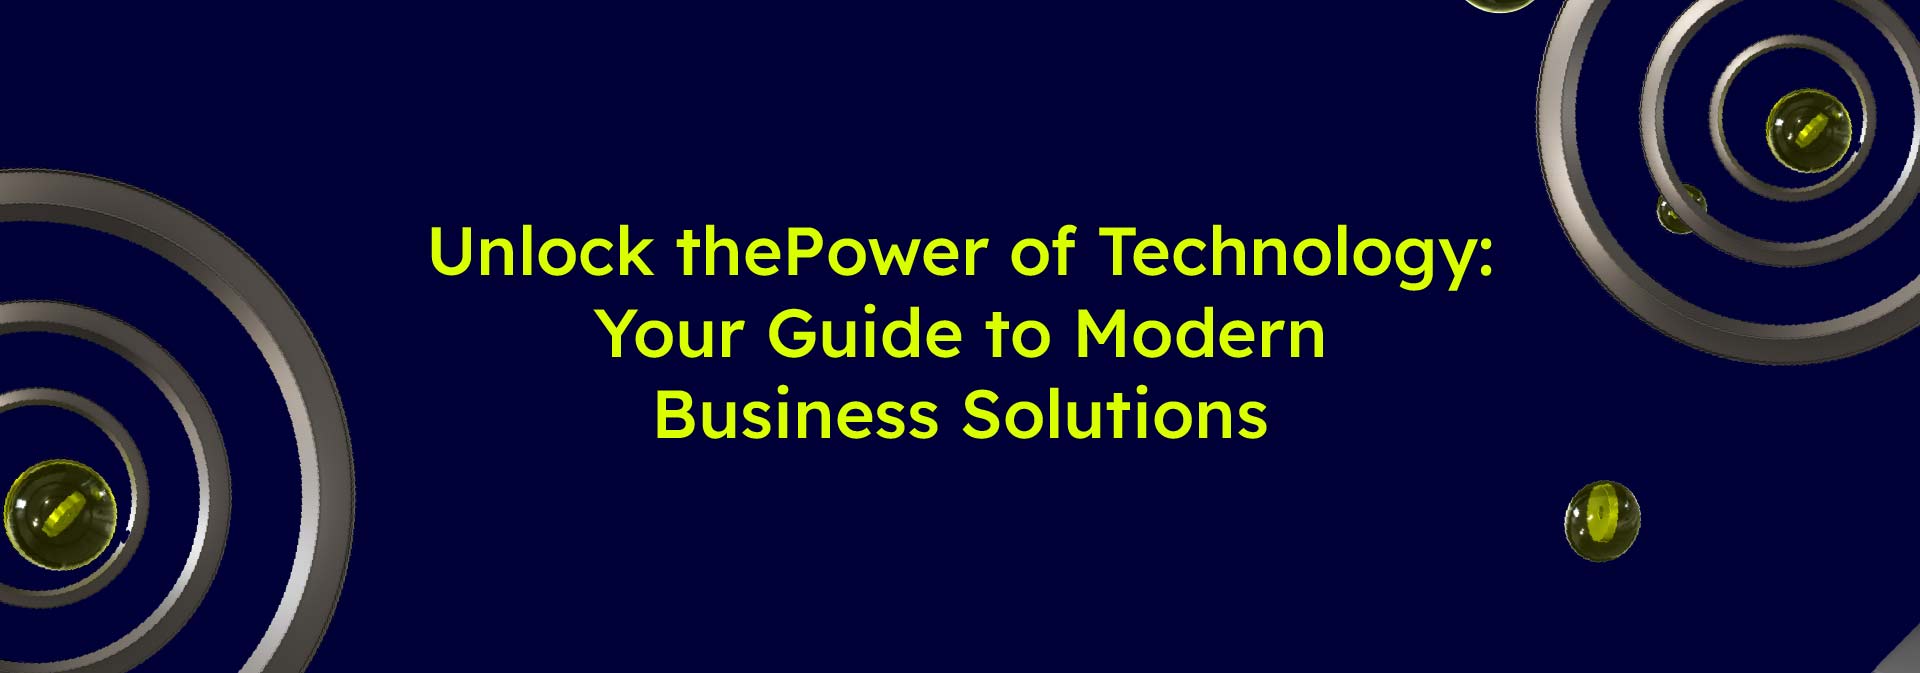 Unlock the Power of Technology: Your Guide to Modern Business Solutions